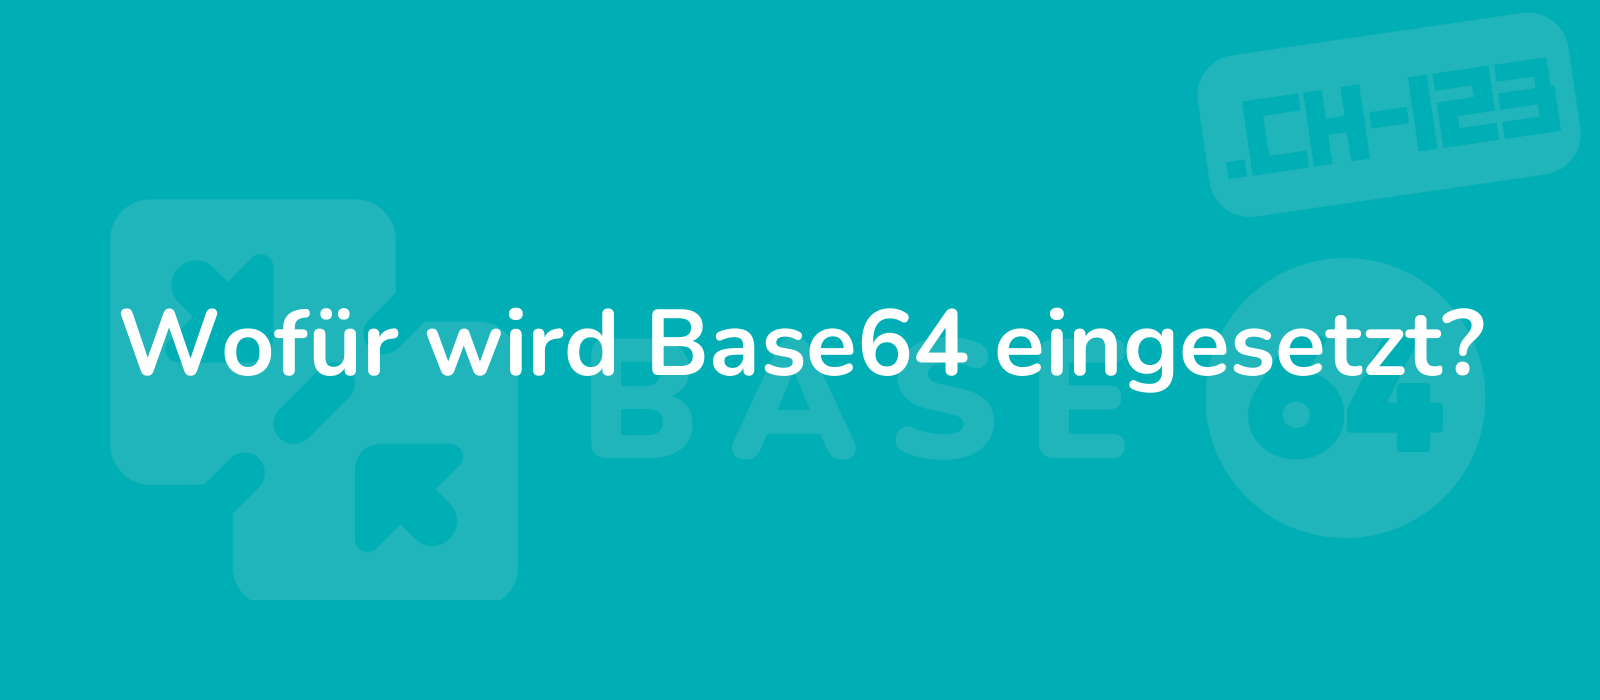 base64 application explained with a visually appealing image featuring coding symbols on a digital background emphasizing simplicity and efficiency